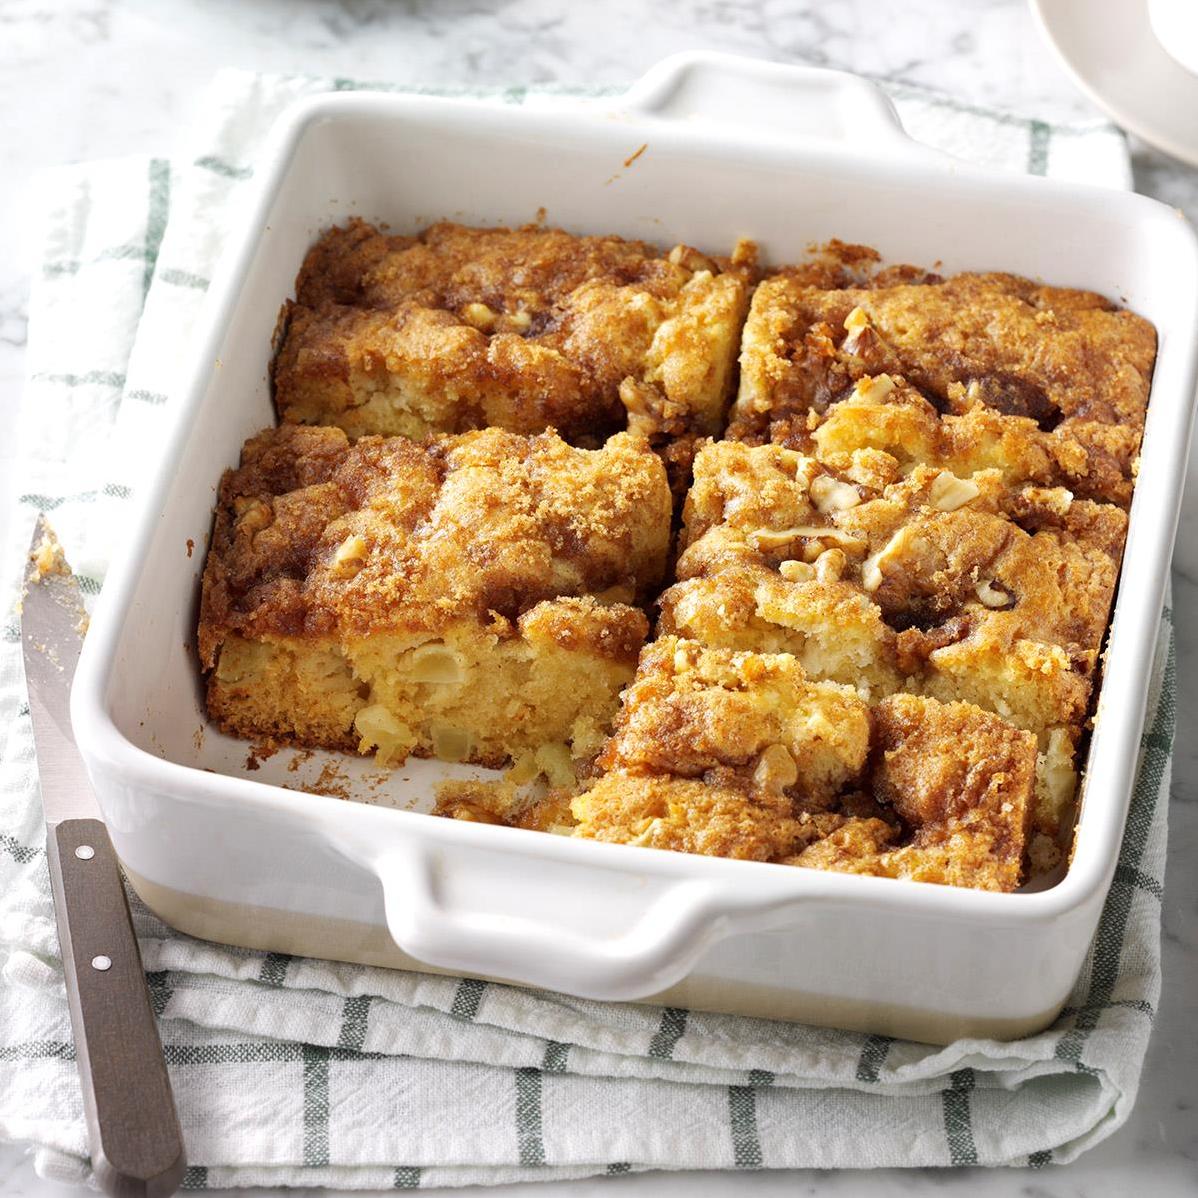  An apple a day keeps the doctor away, but an apple coffee cake a day keeps the blues away.